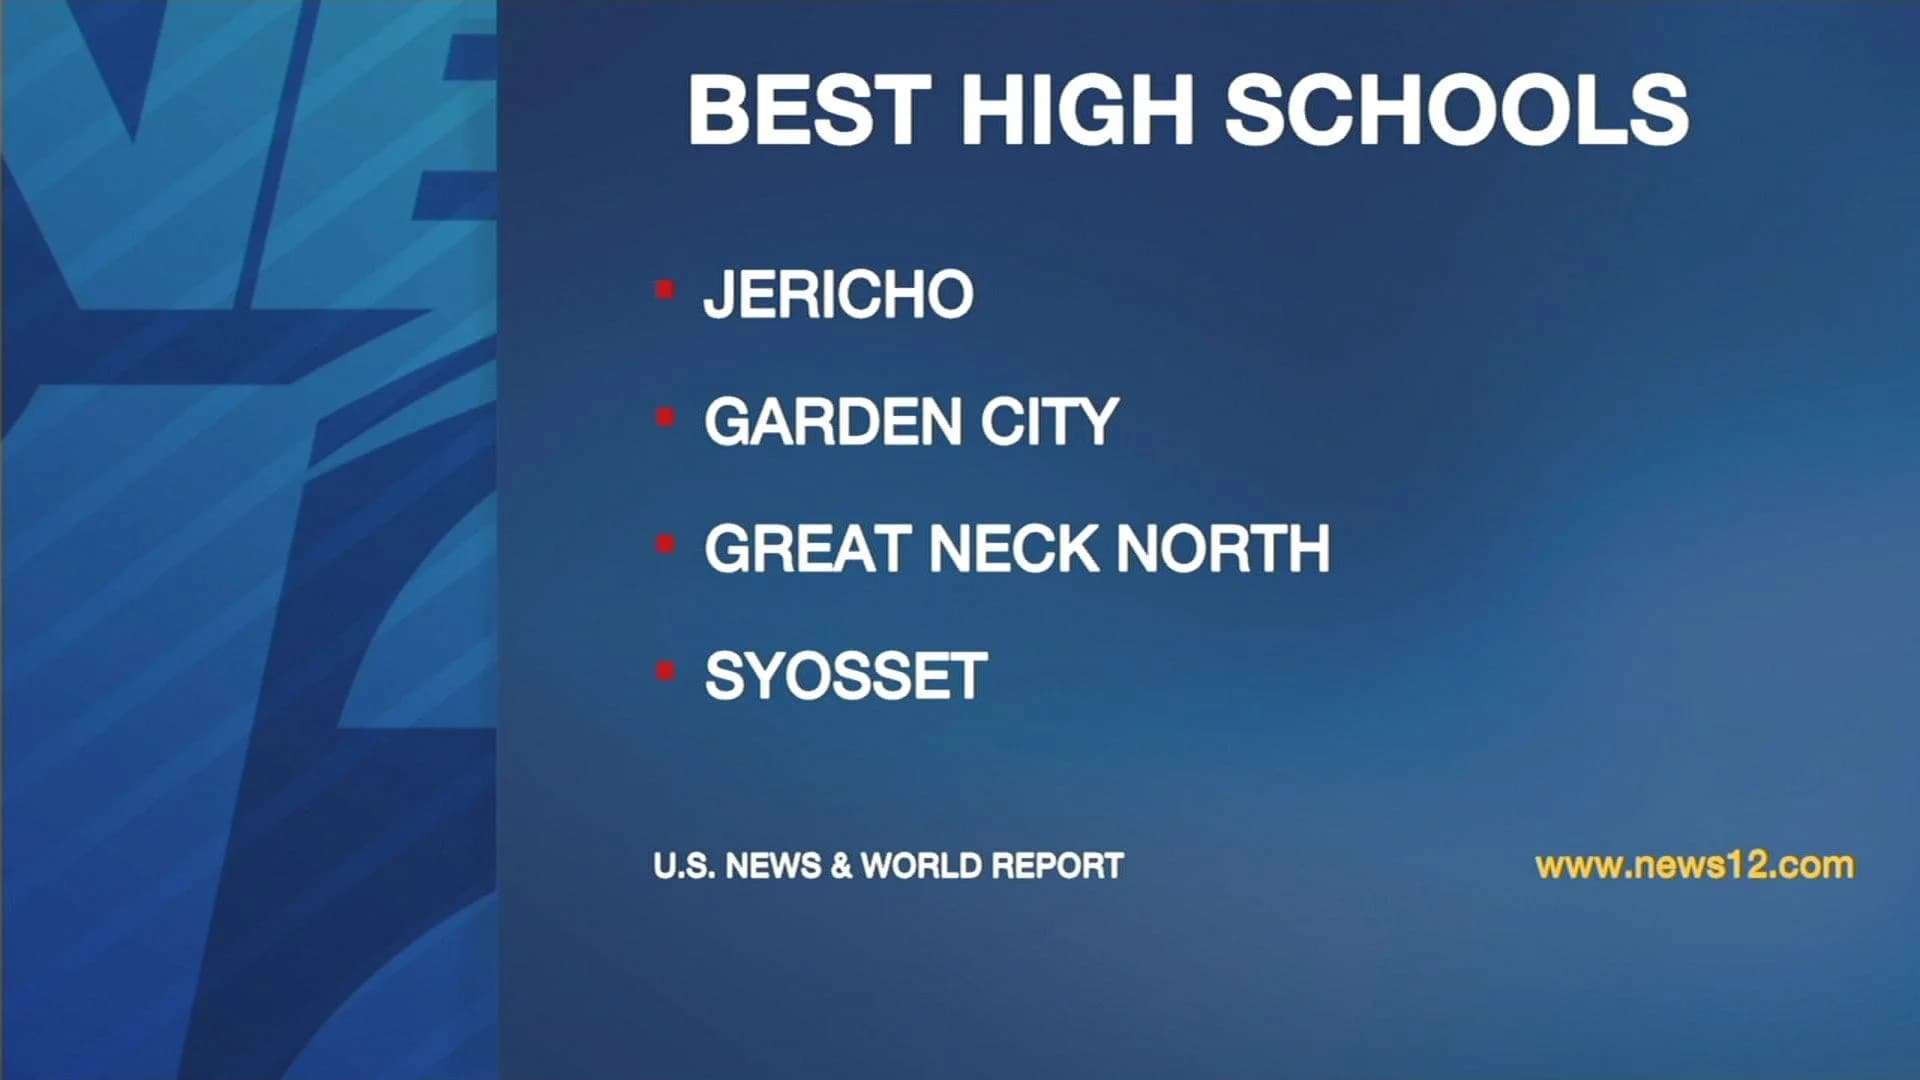 U.S. News and World Report names 7 LI schools best in the nation